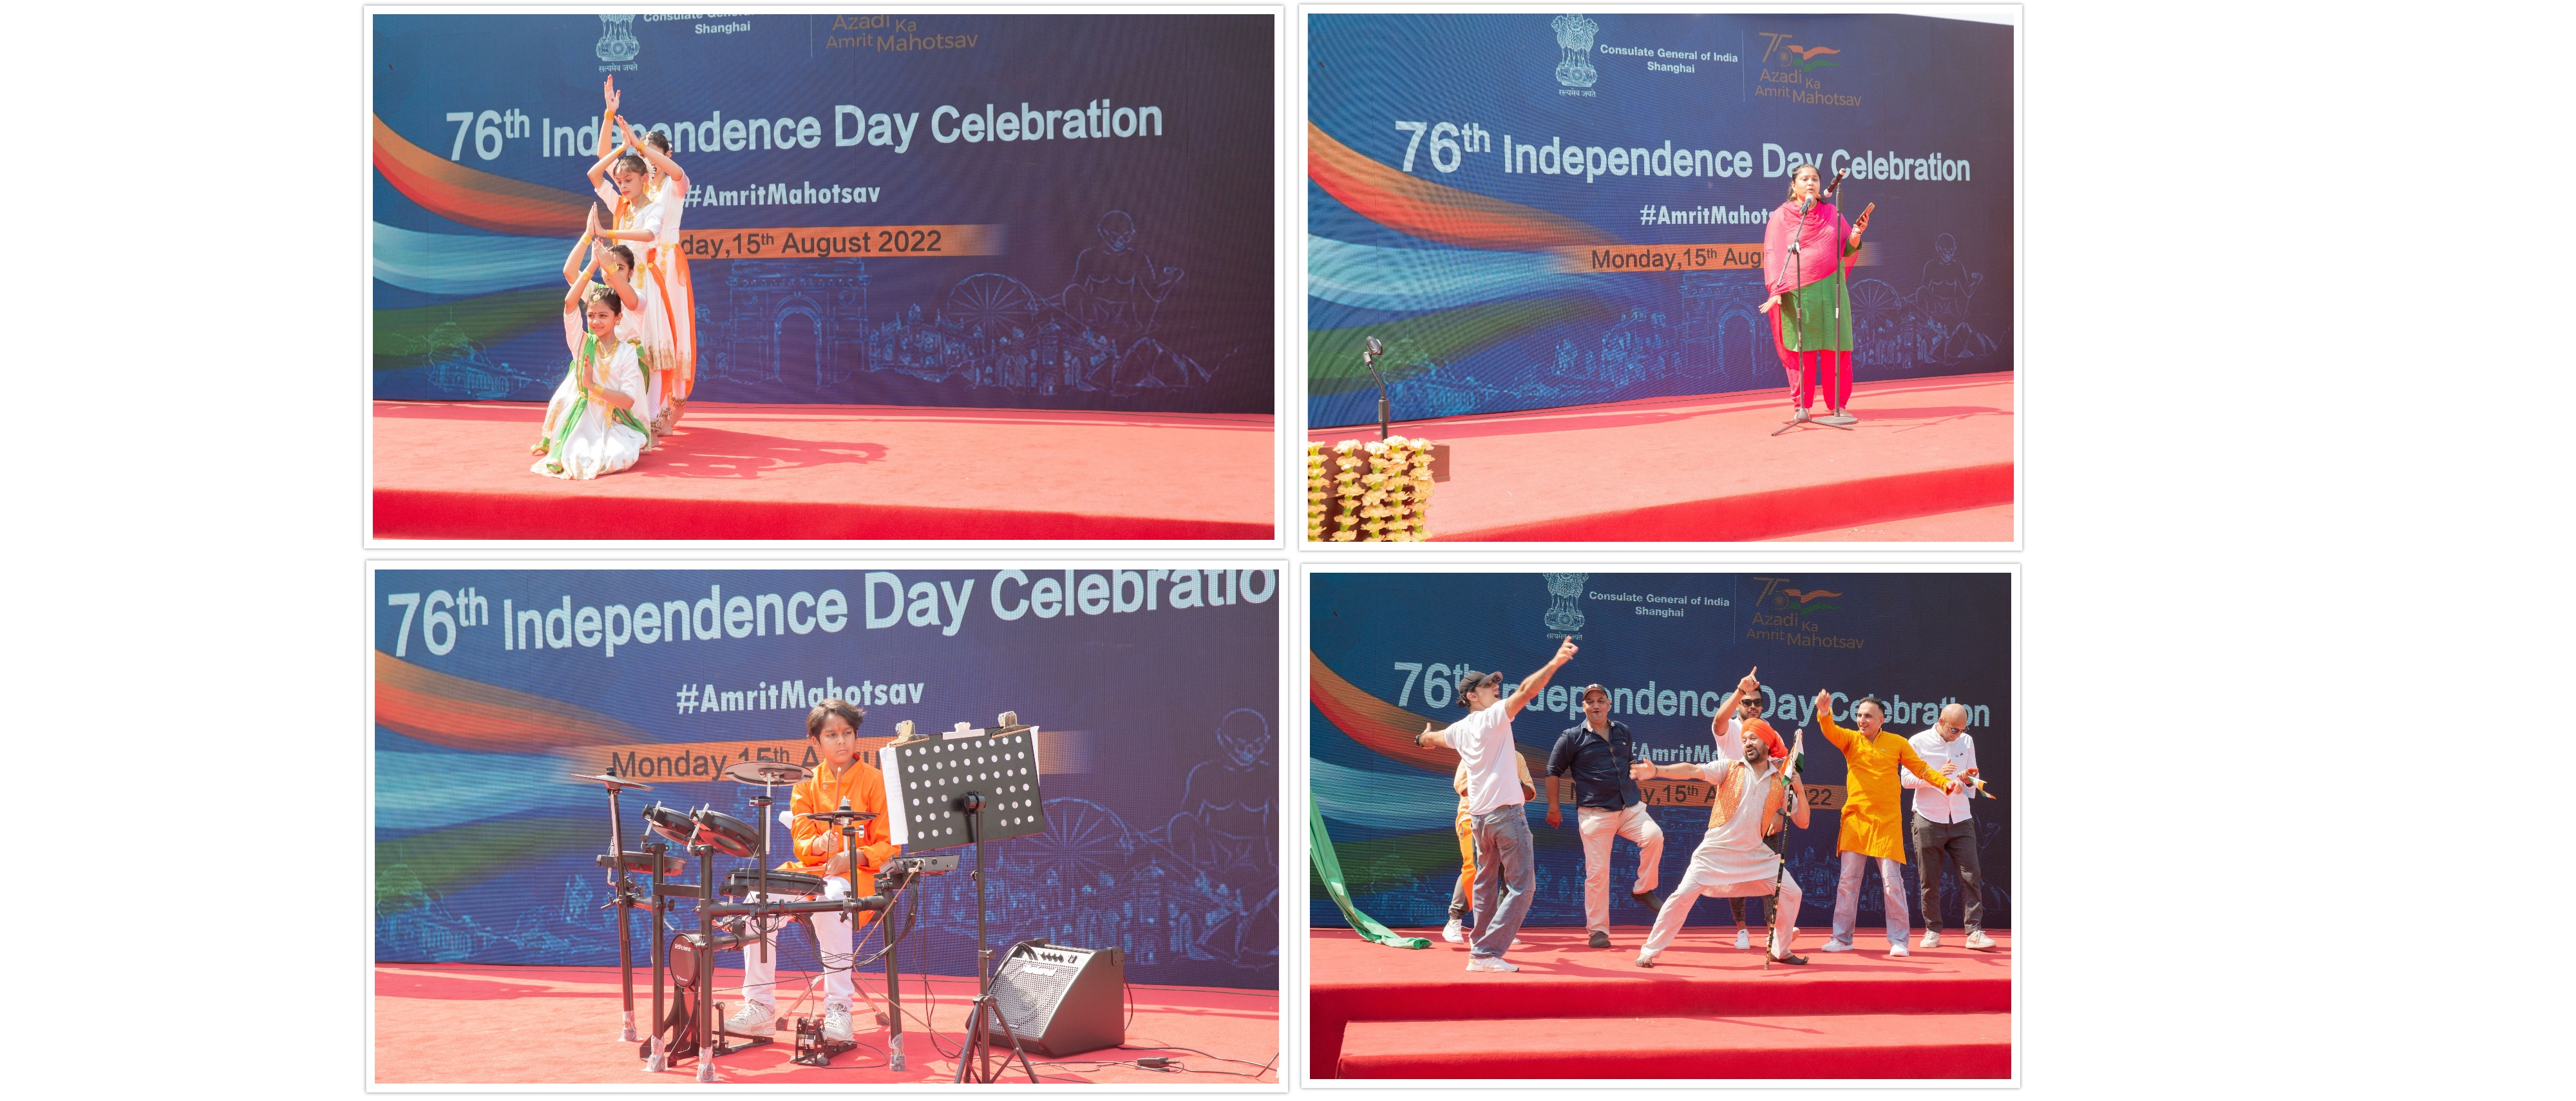 Celebration of 76th Independence Day of India in Shanghai (15 August 2022)